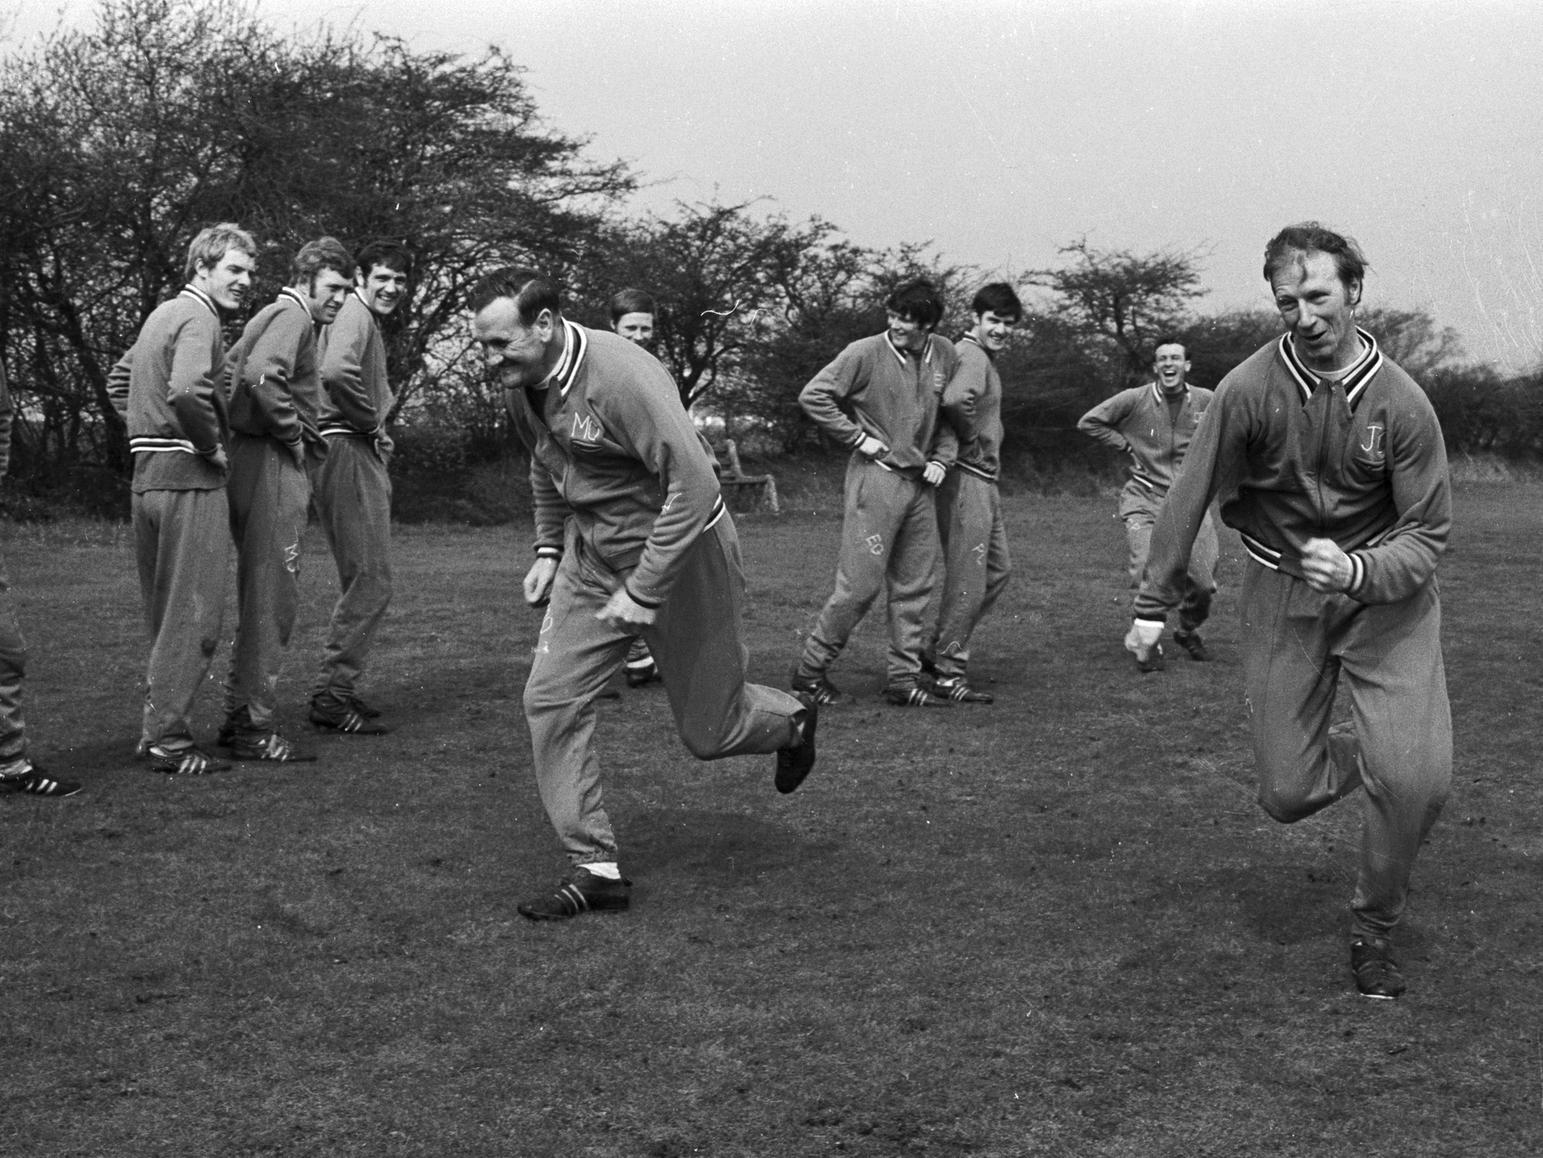 April 1970 and Don Revie puts Jack Charlton and the rest of the team through their paces prior to the FA Cup final against Chelsea. PIC: Getty